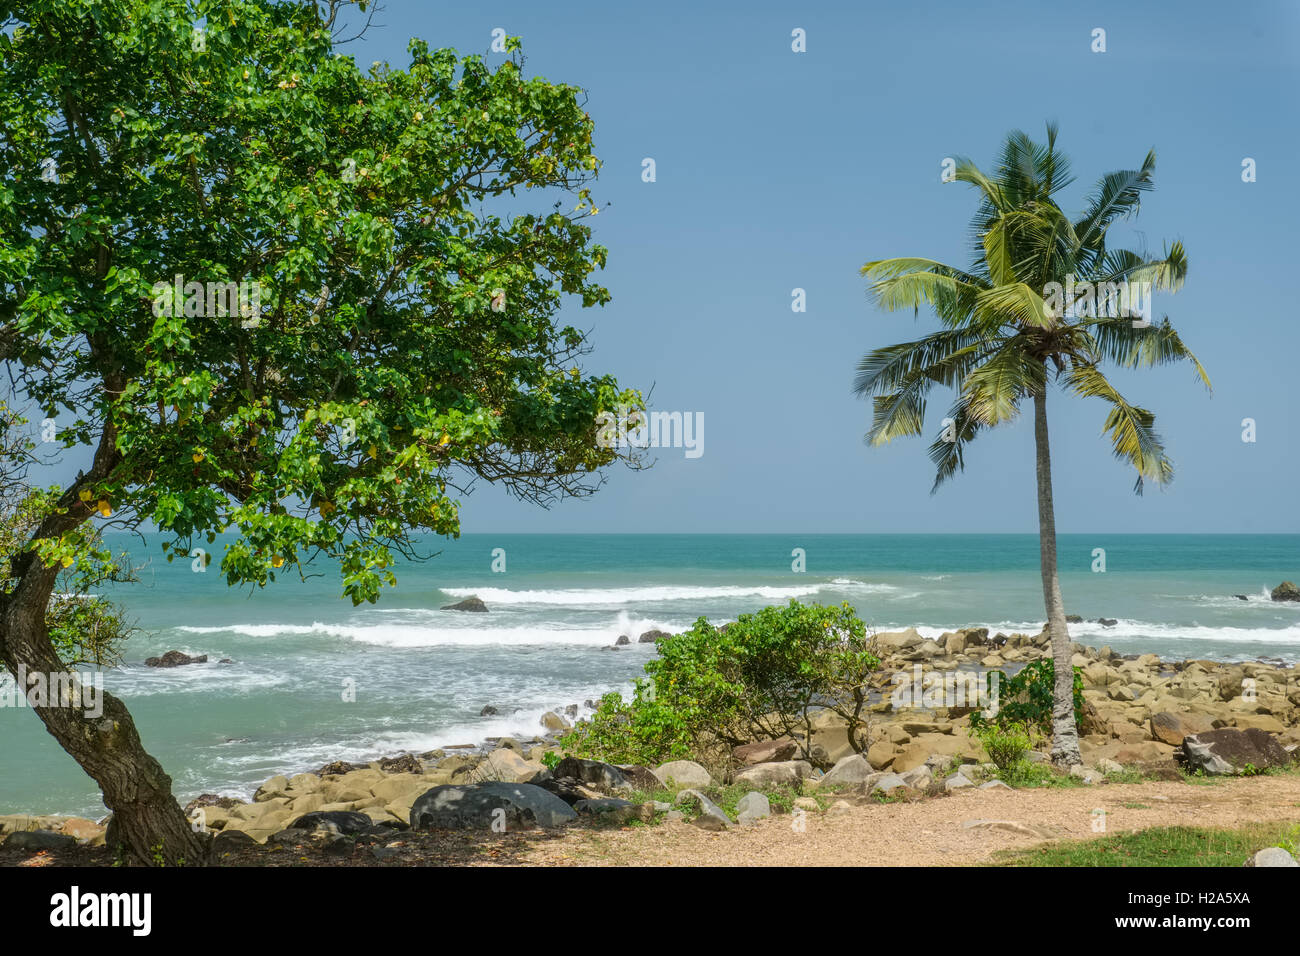 Palm tree and curved trunk tree on rocky ocean coastline with waves in the background at Dixcove in Ghana Stock Photo